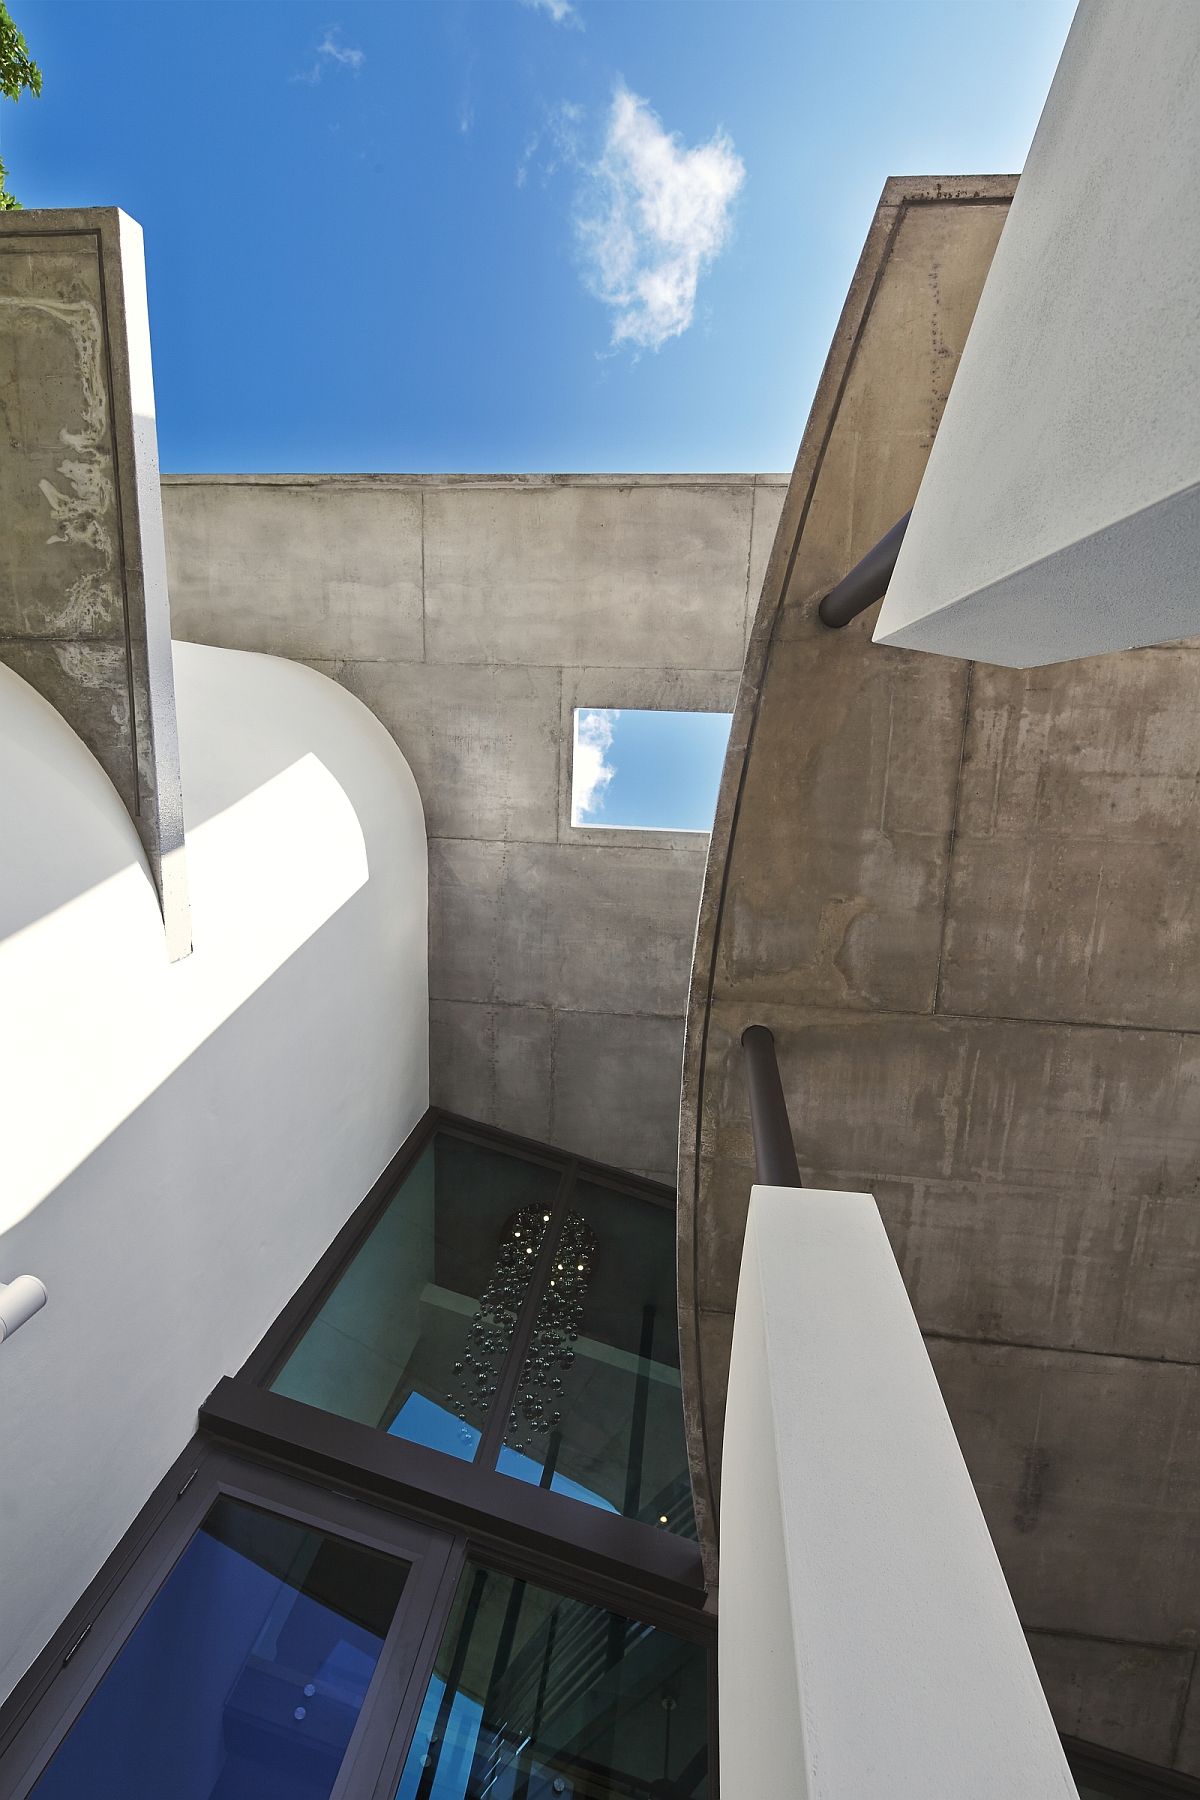 Concrete roof lines offer visual and textural contrast a the smart home